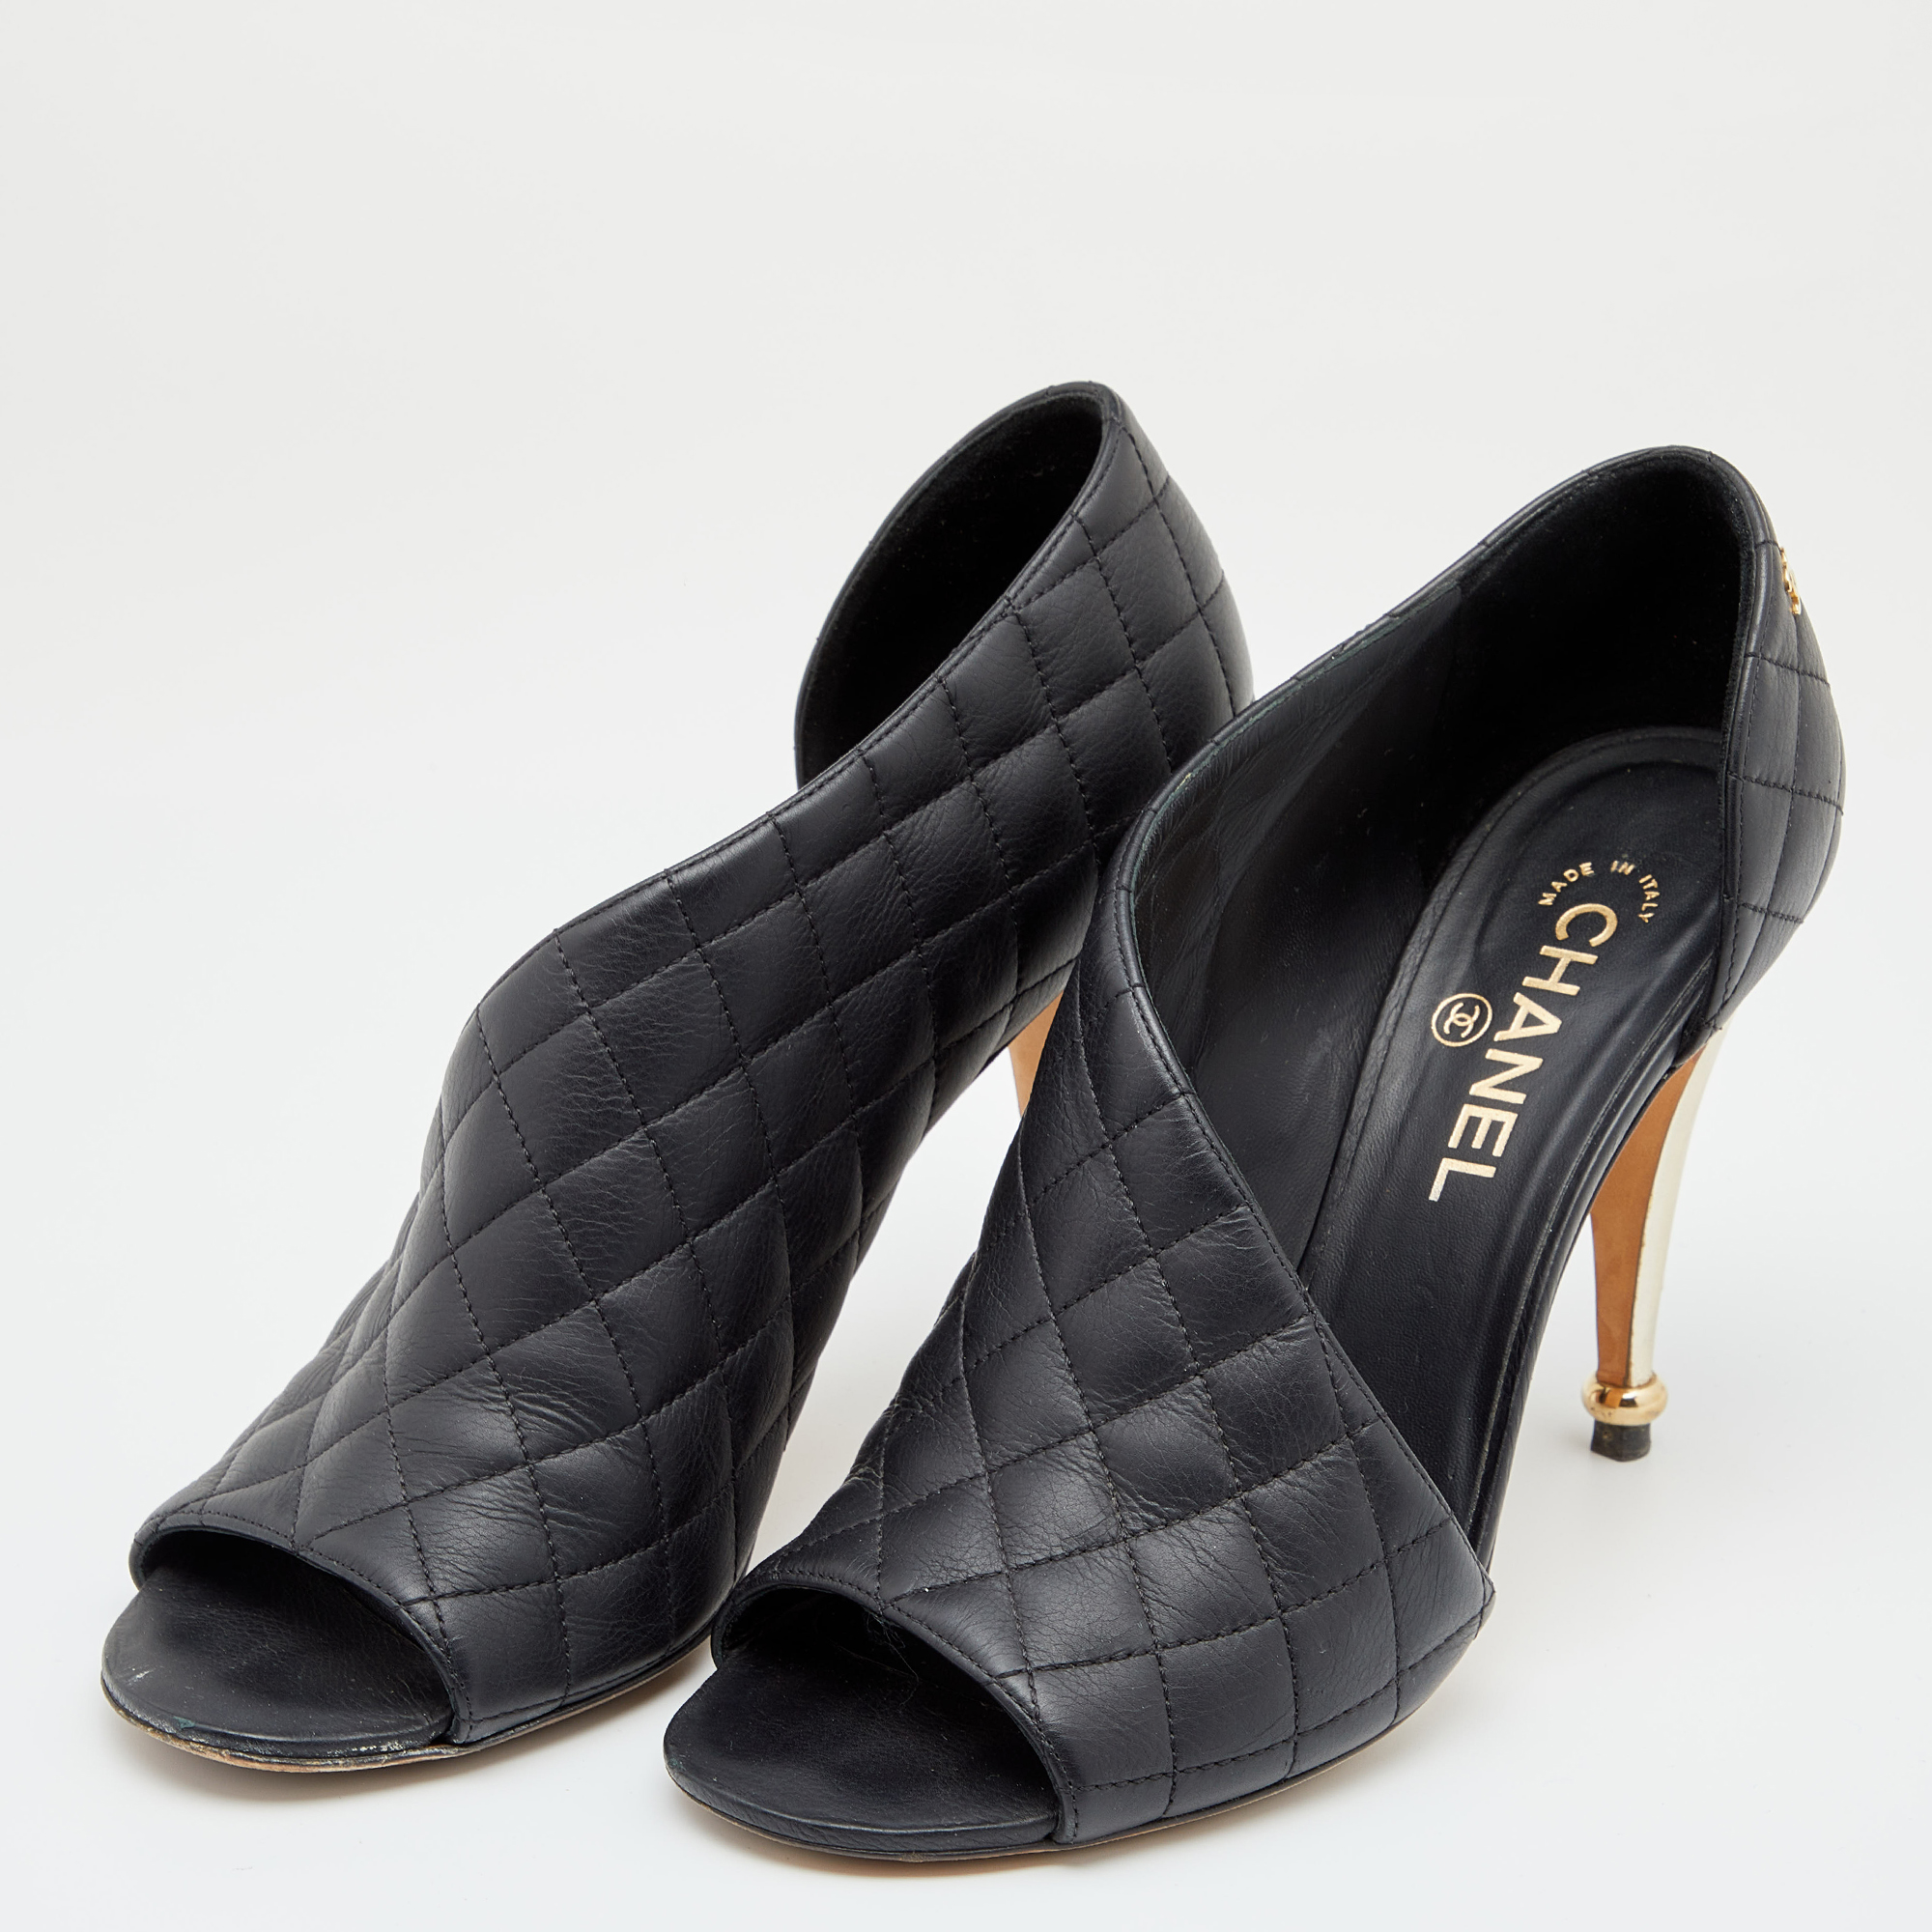 

Chanel Black Quilted Leather CC D'orsay Peep Toe Pumps Size